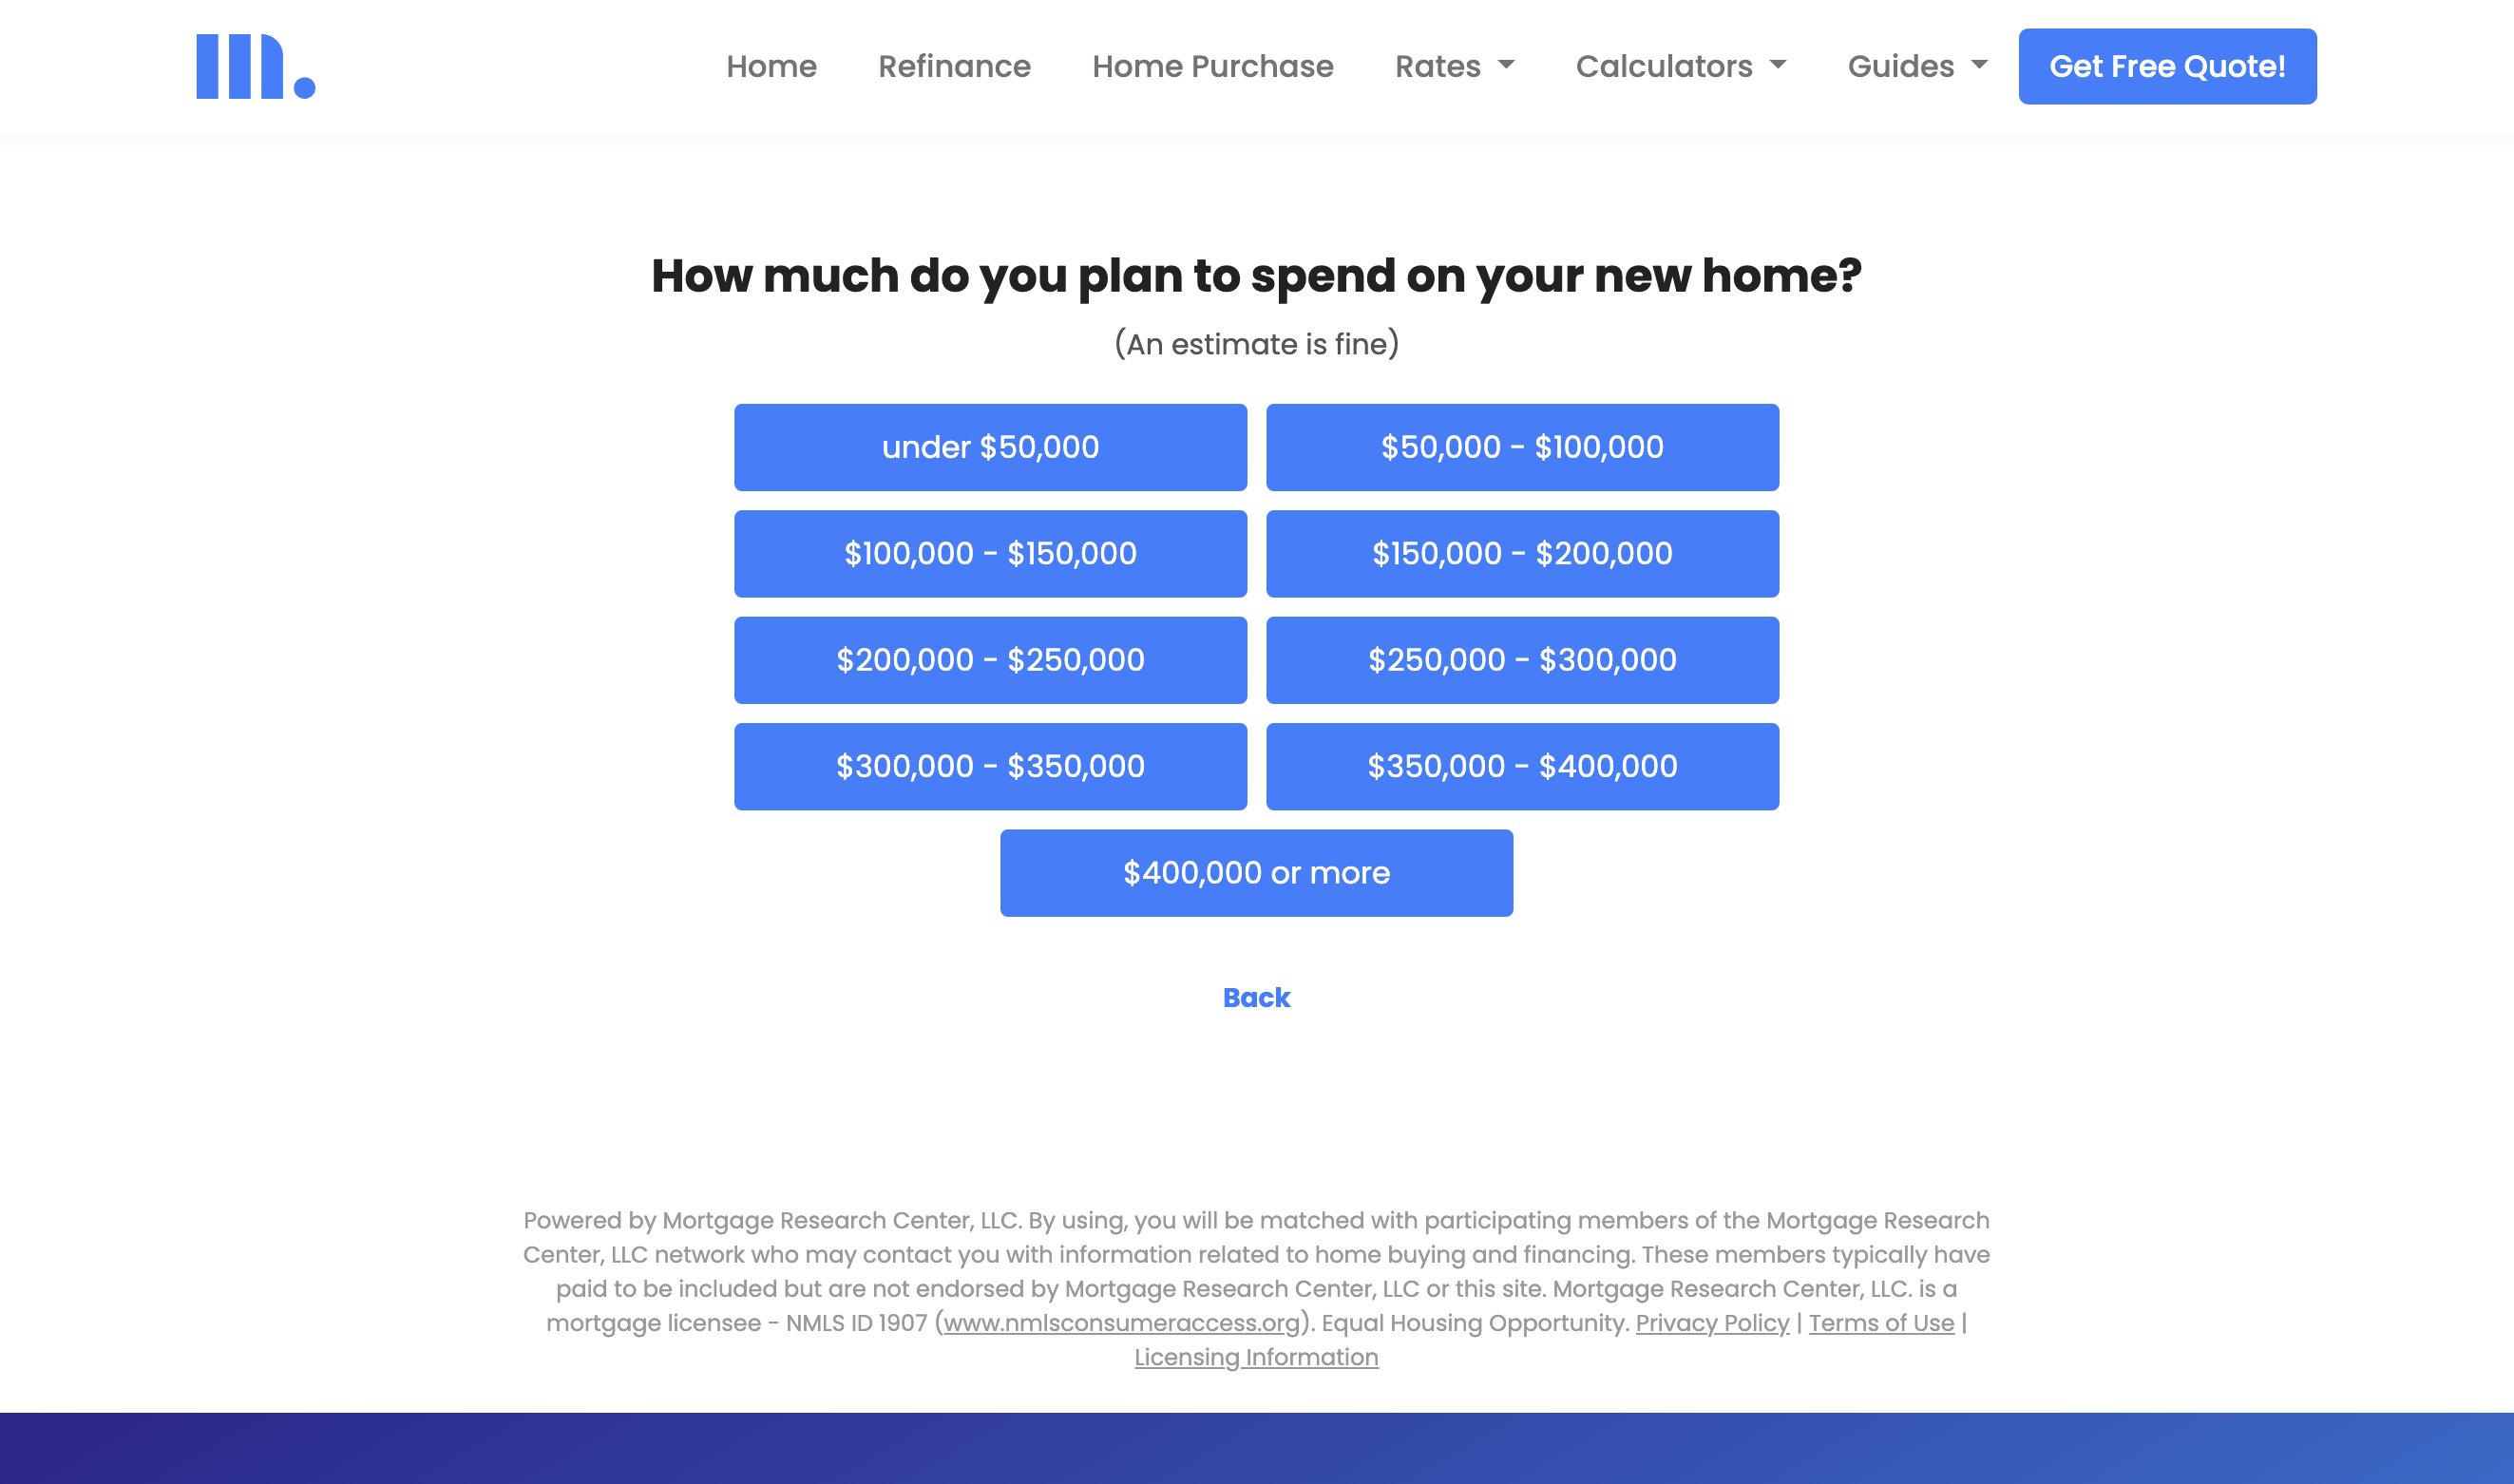 example multi step lead form for mortgage landing page